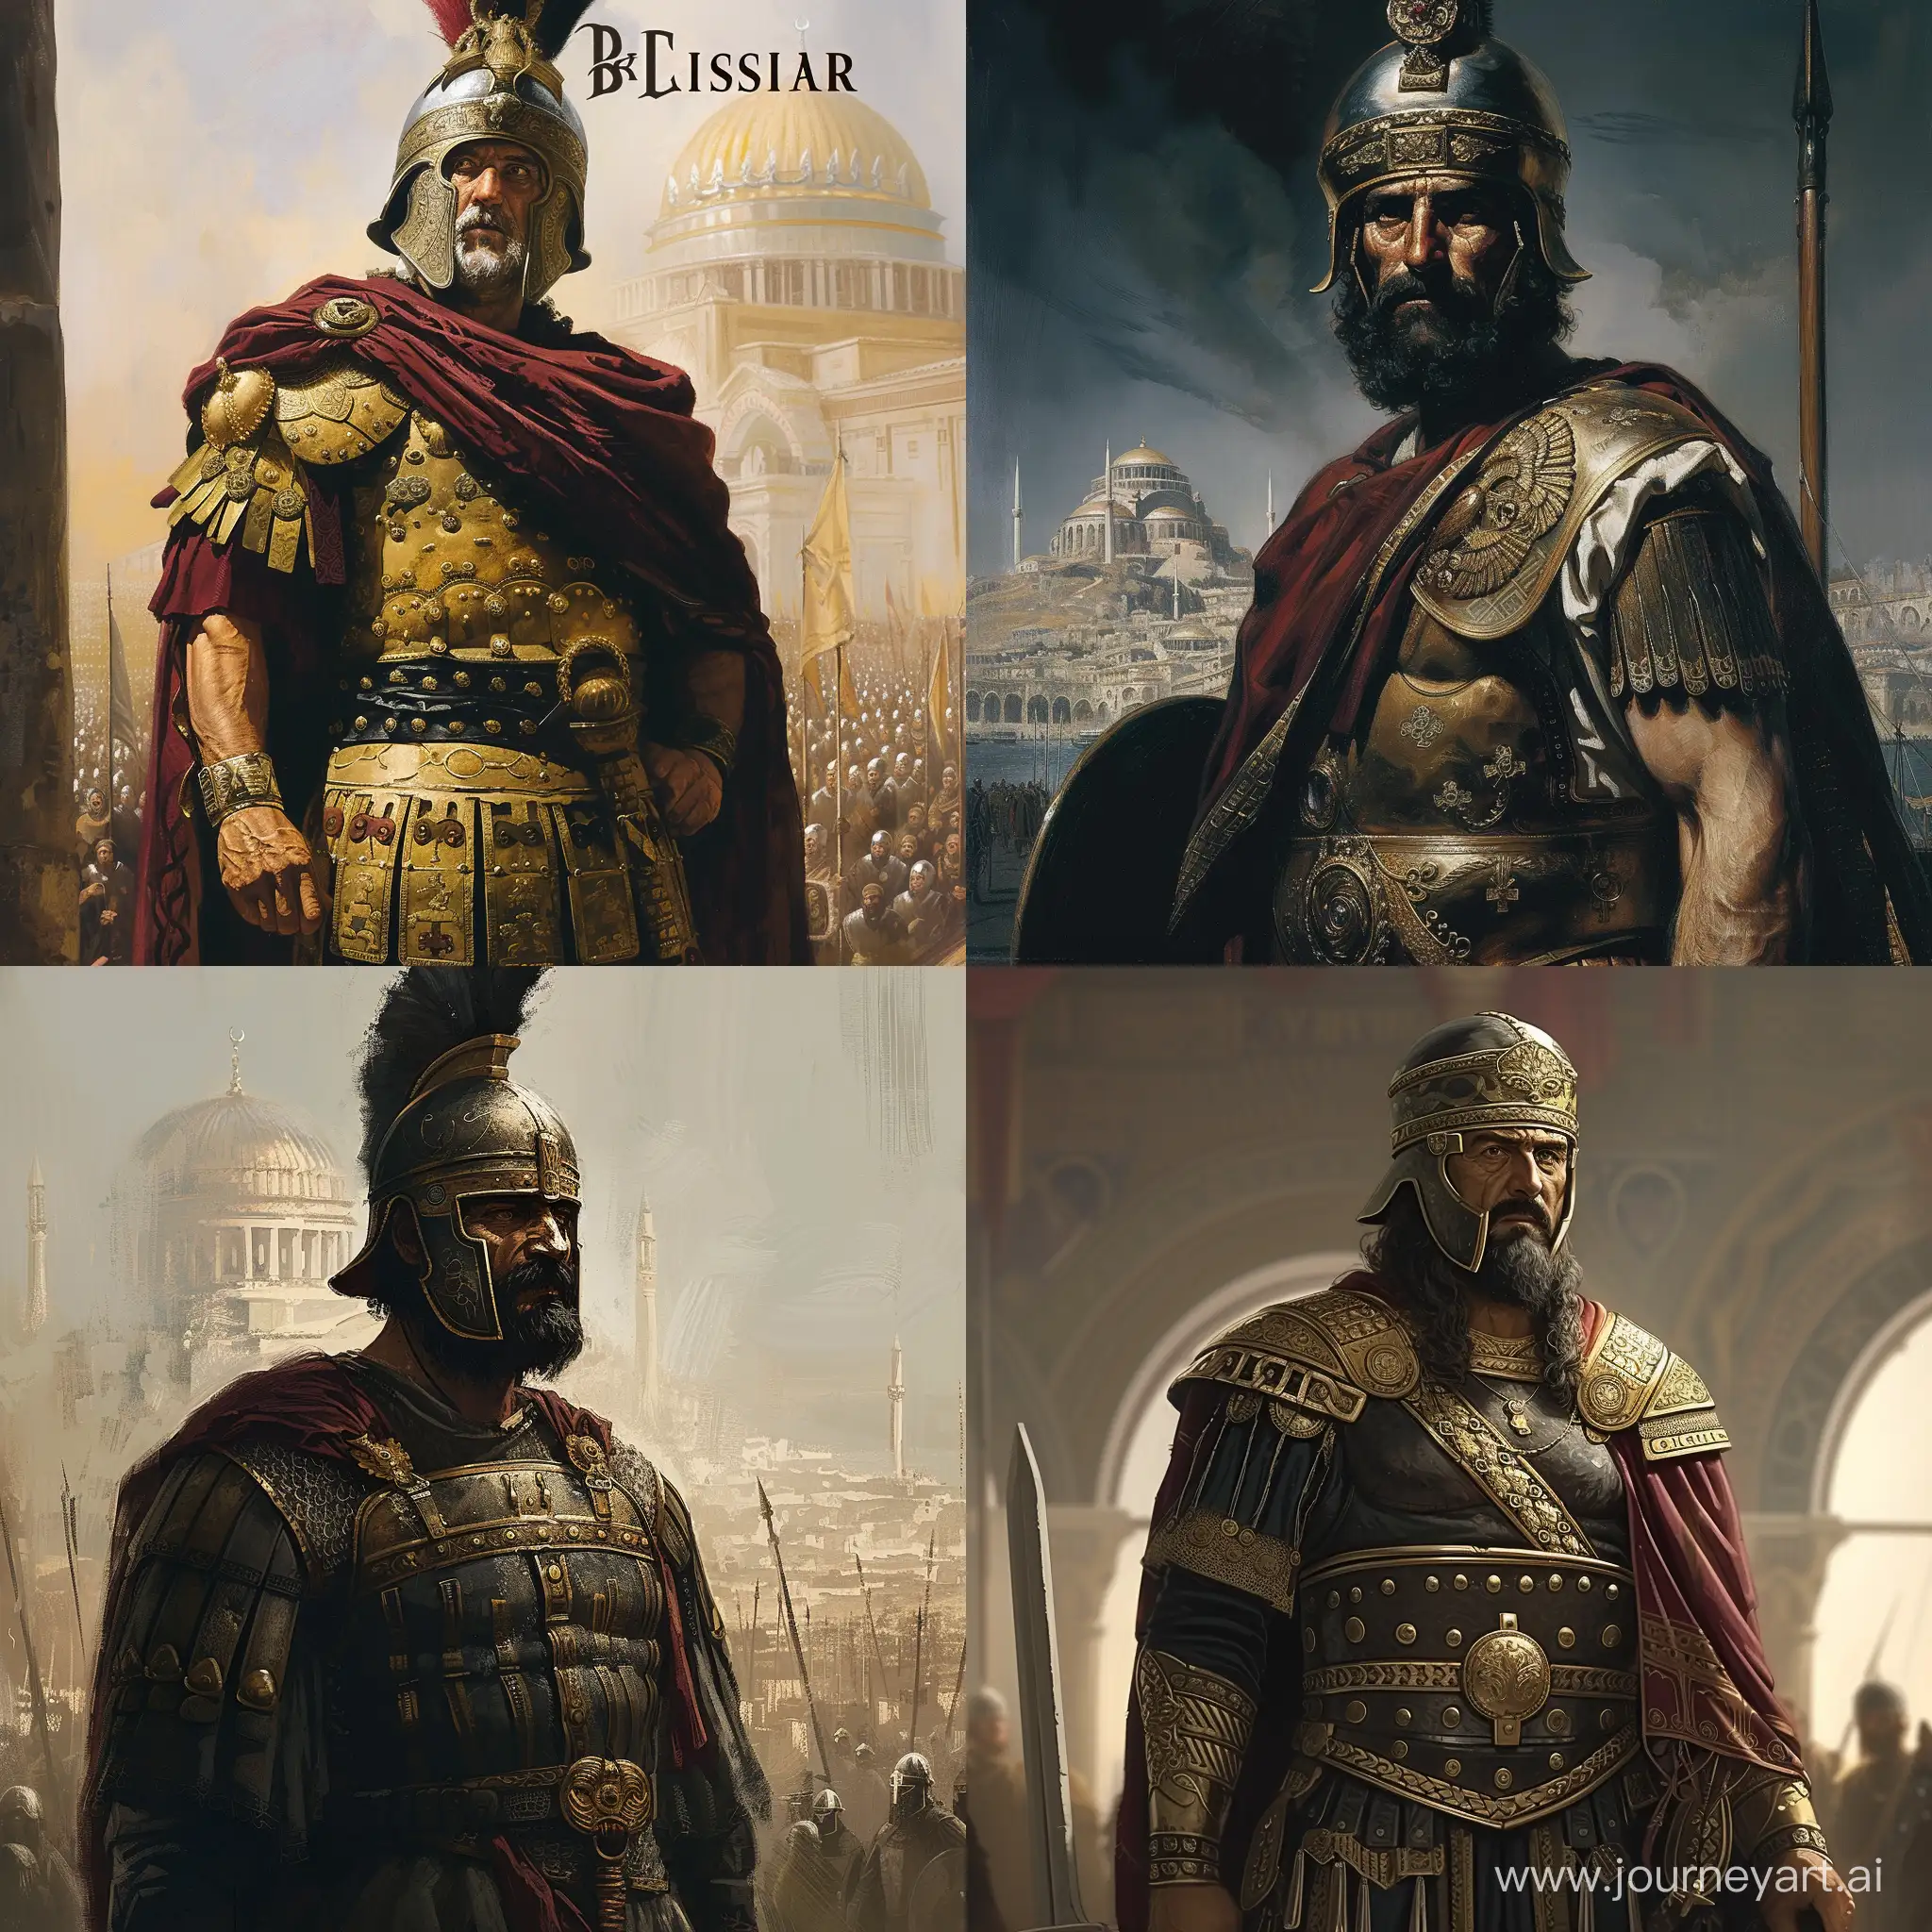 Byzantine General Belisarius standing tall. Constantinople background. Wearing byzantine noble attire and helmet. He seems brave and proud.